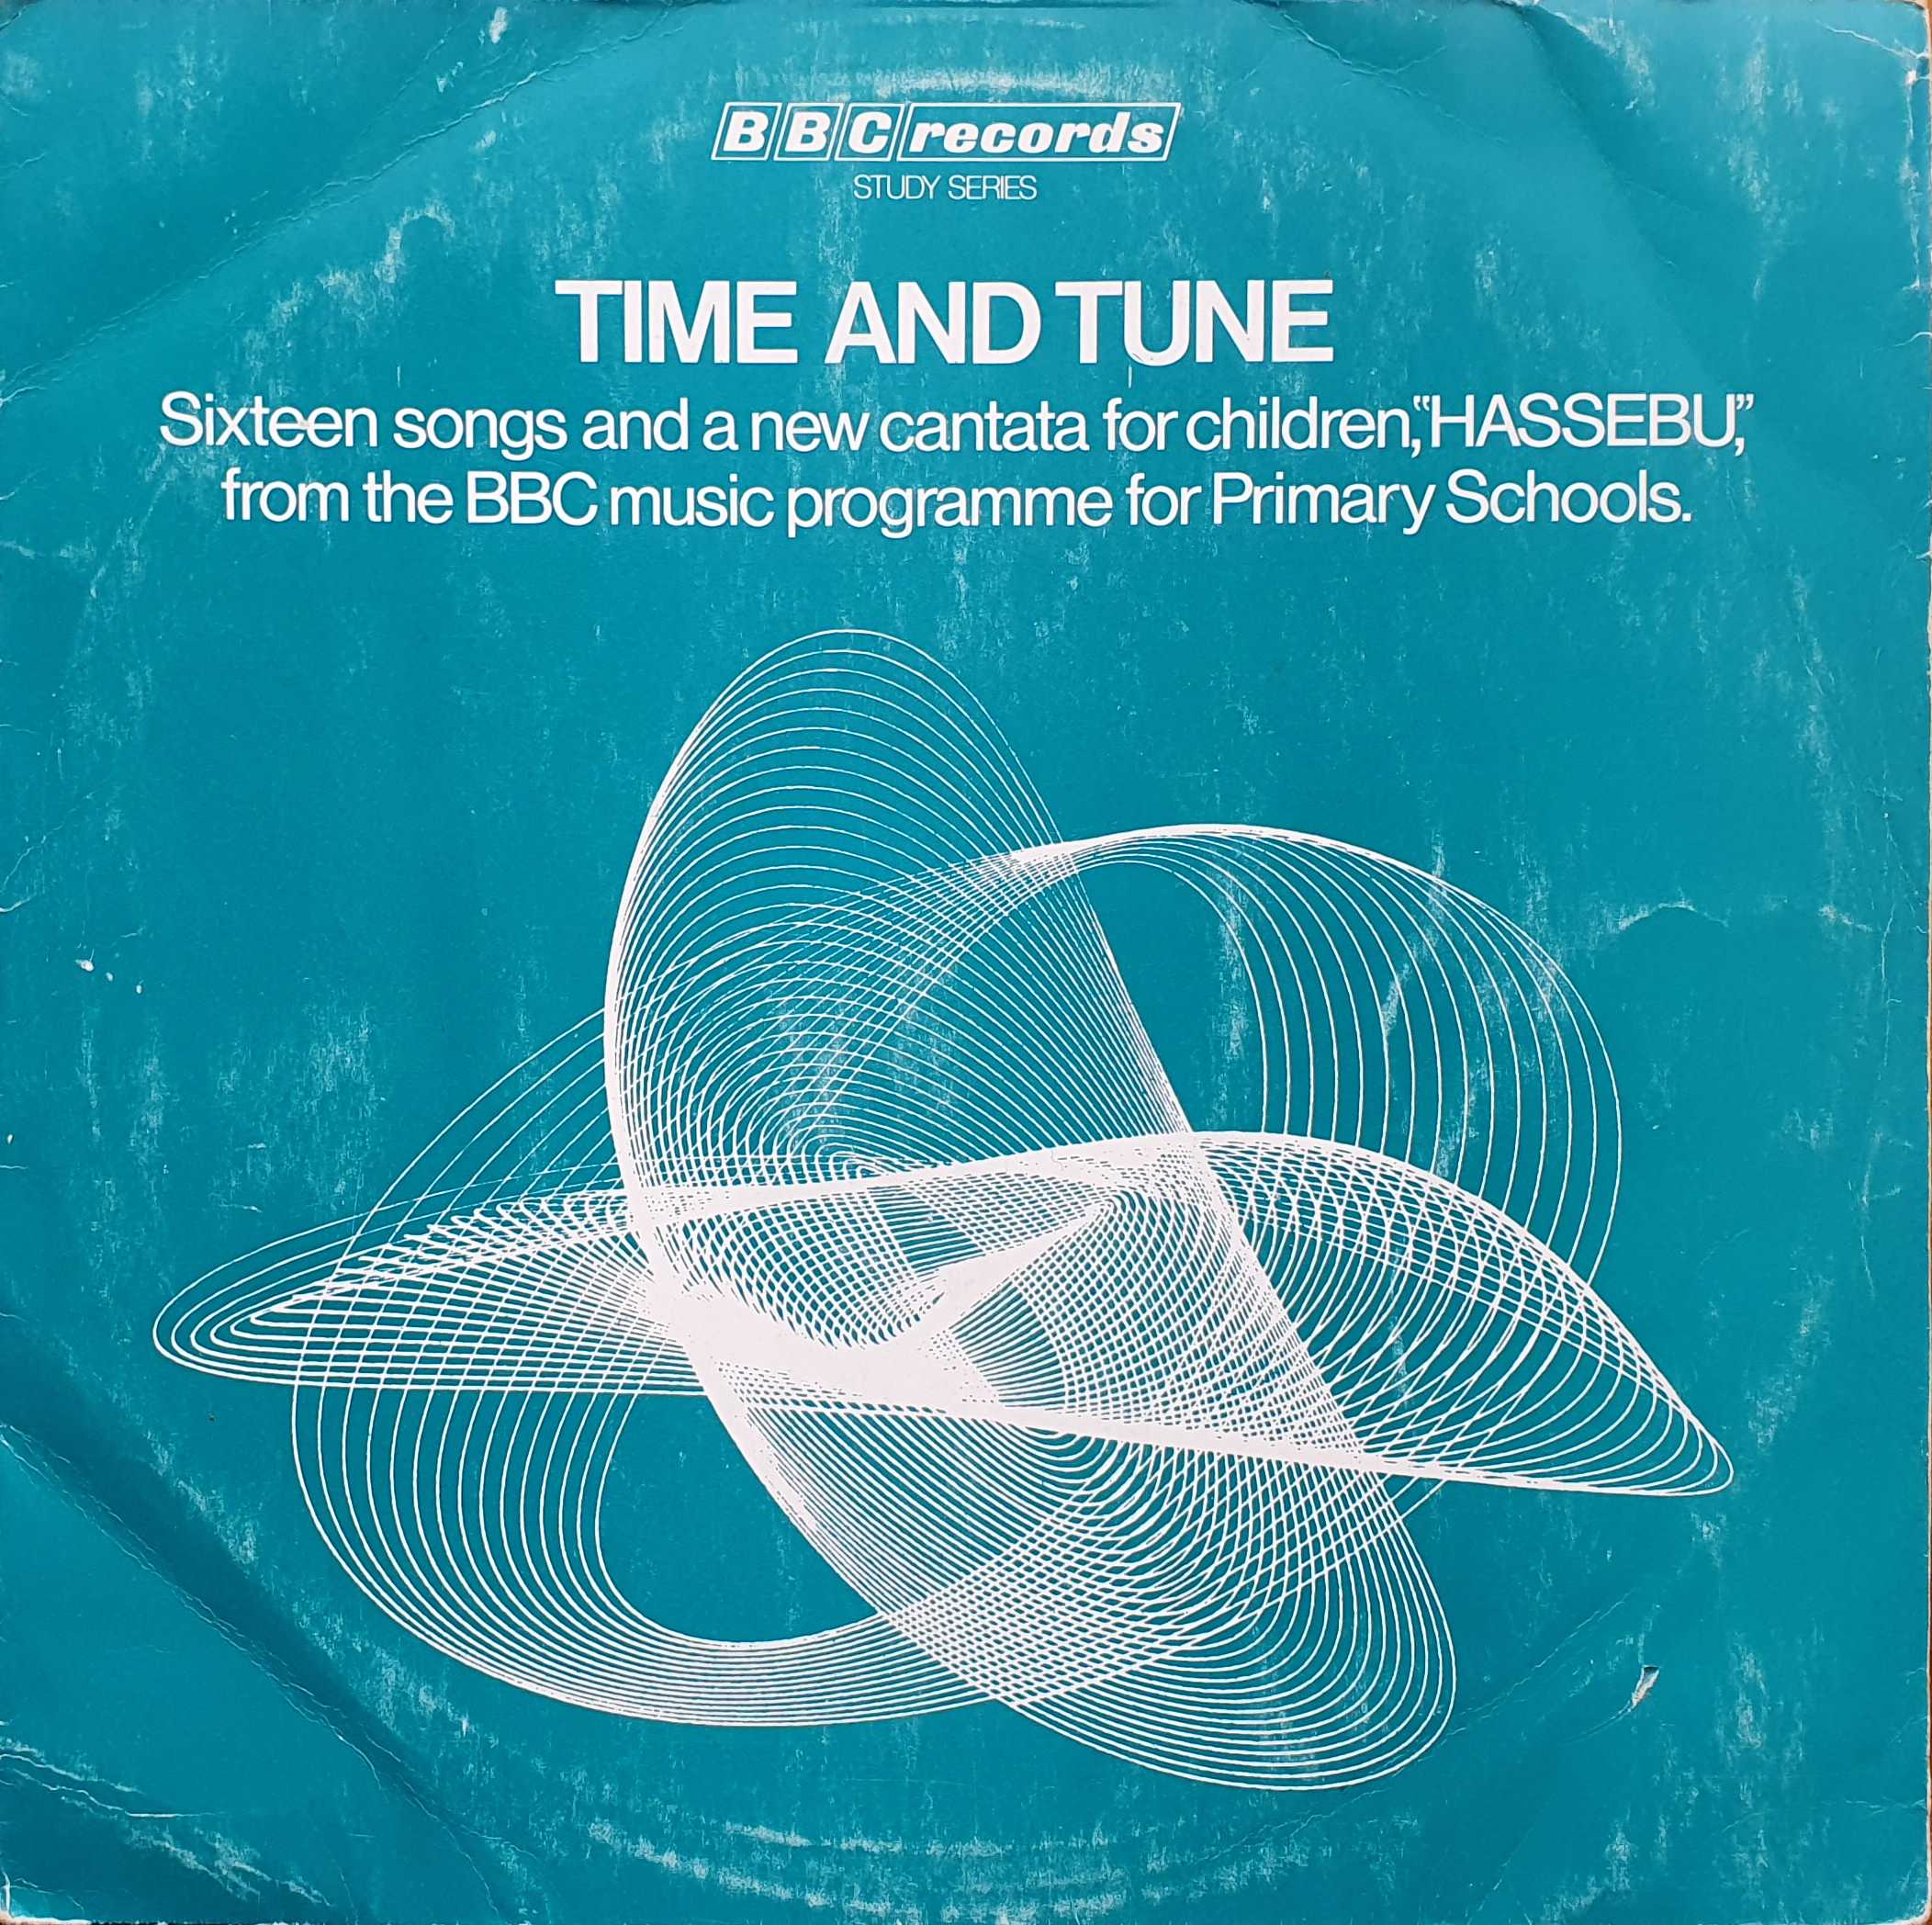 Picture of RESR 23 Time and tune  by artist Various from the BBC albums - Records and Tapes library